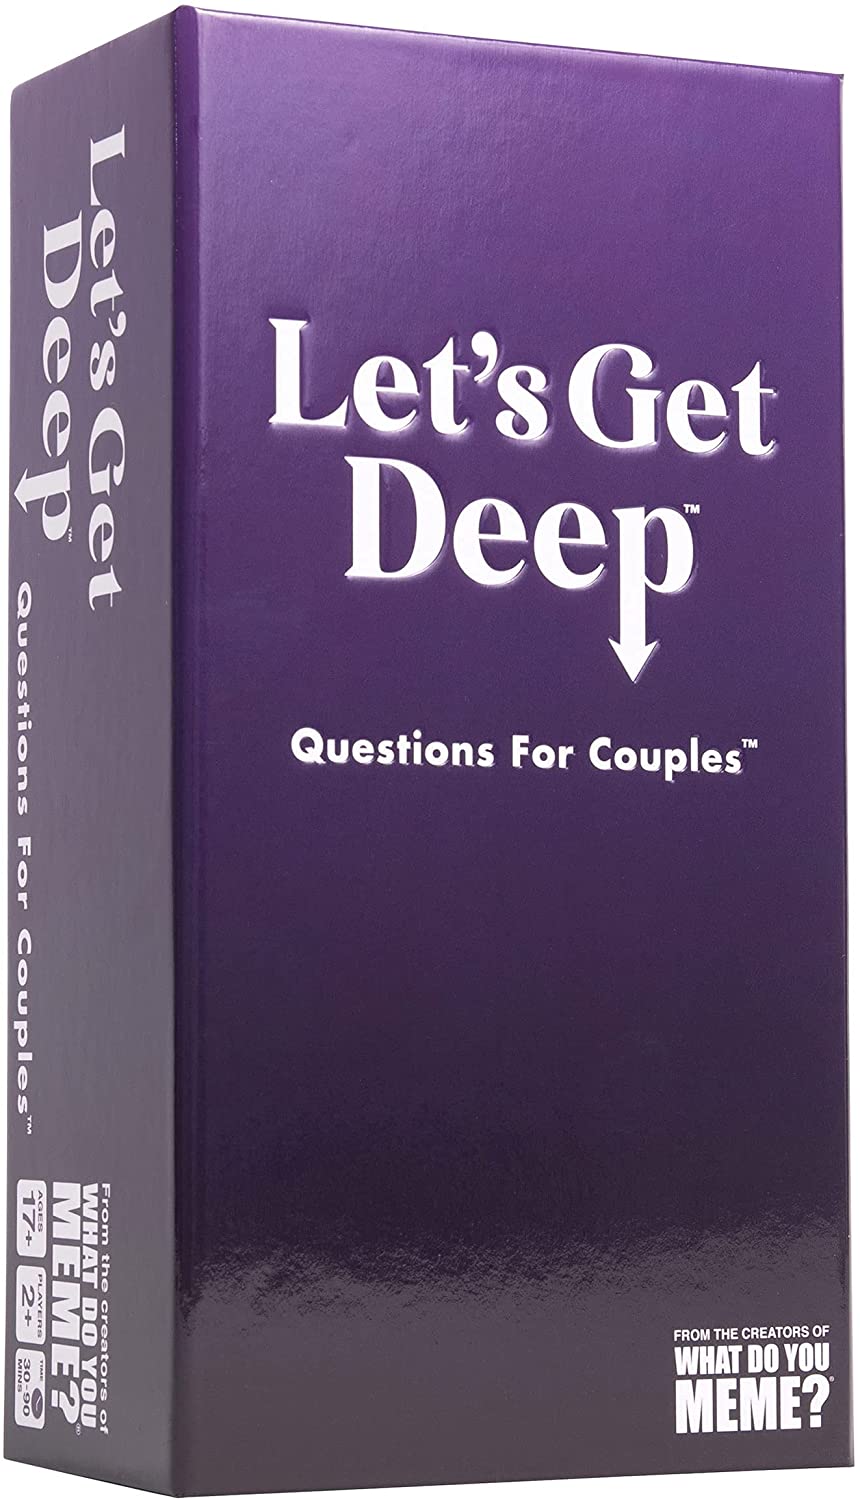 Let's Get Deep: Questions For Couples